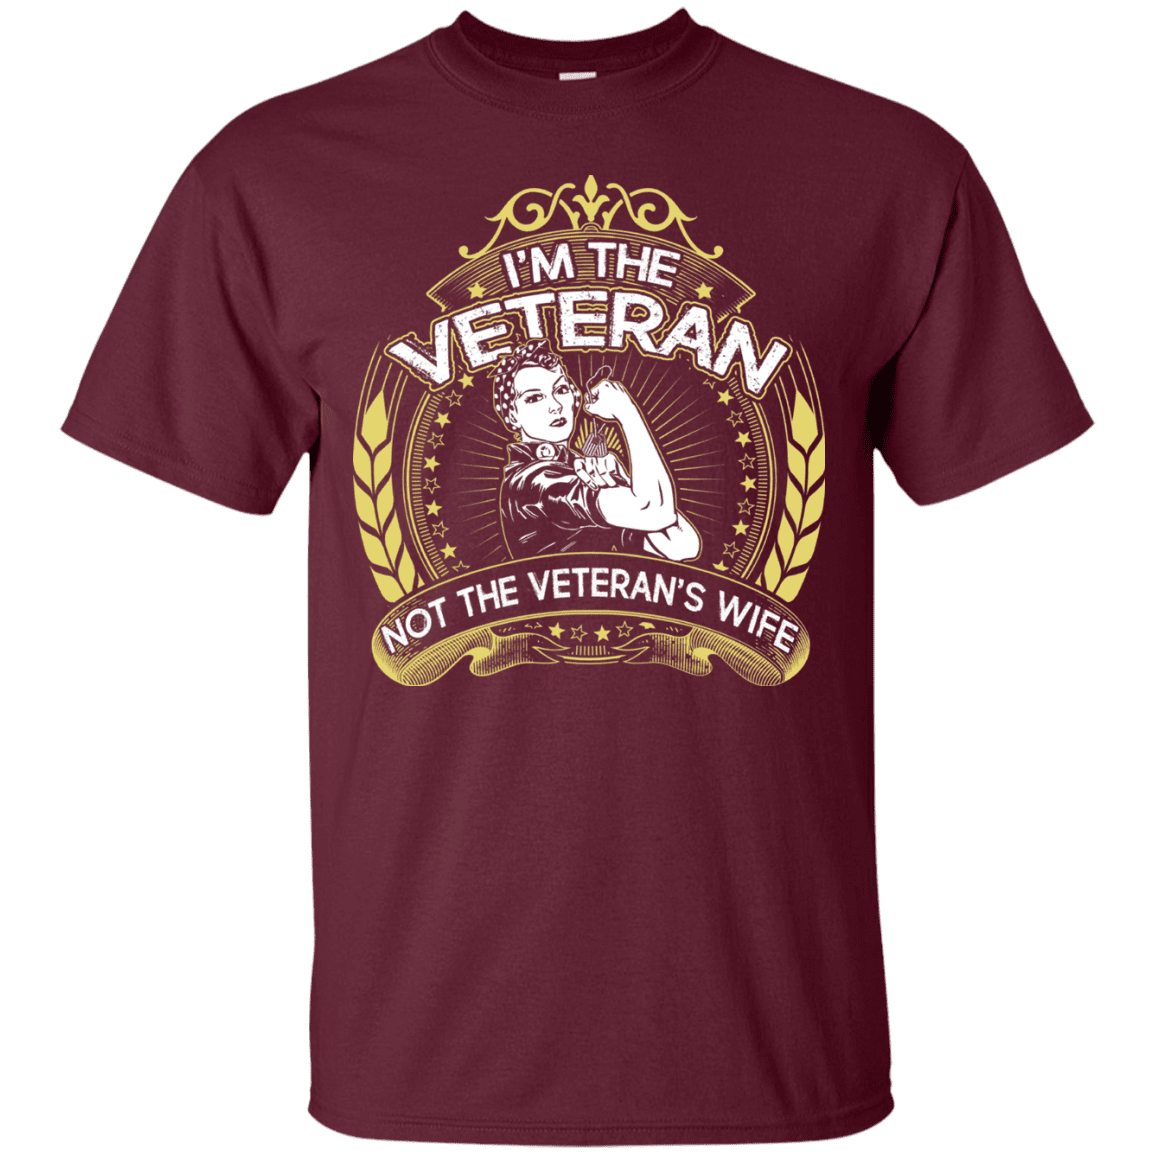 Military T-Shirt "I AM THE VETERAN AND NOT THE VETERAN'S WIFE"-TShirt-General-Veterans Nation